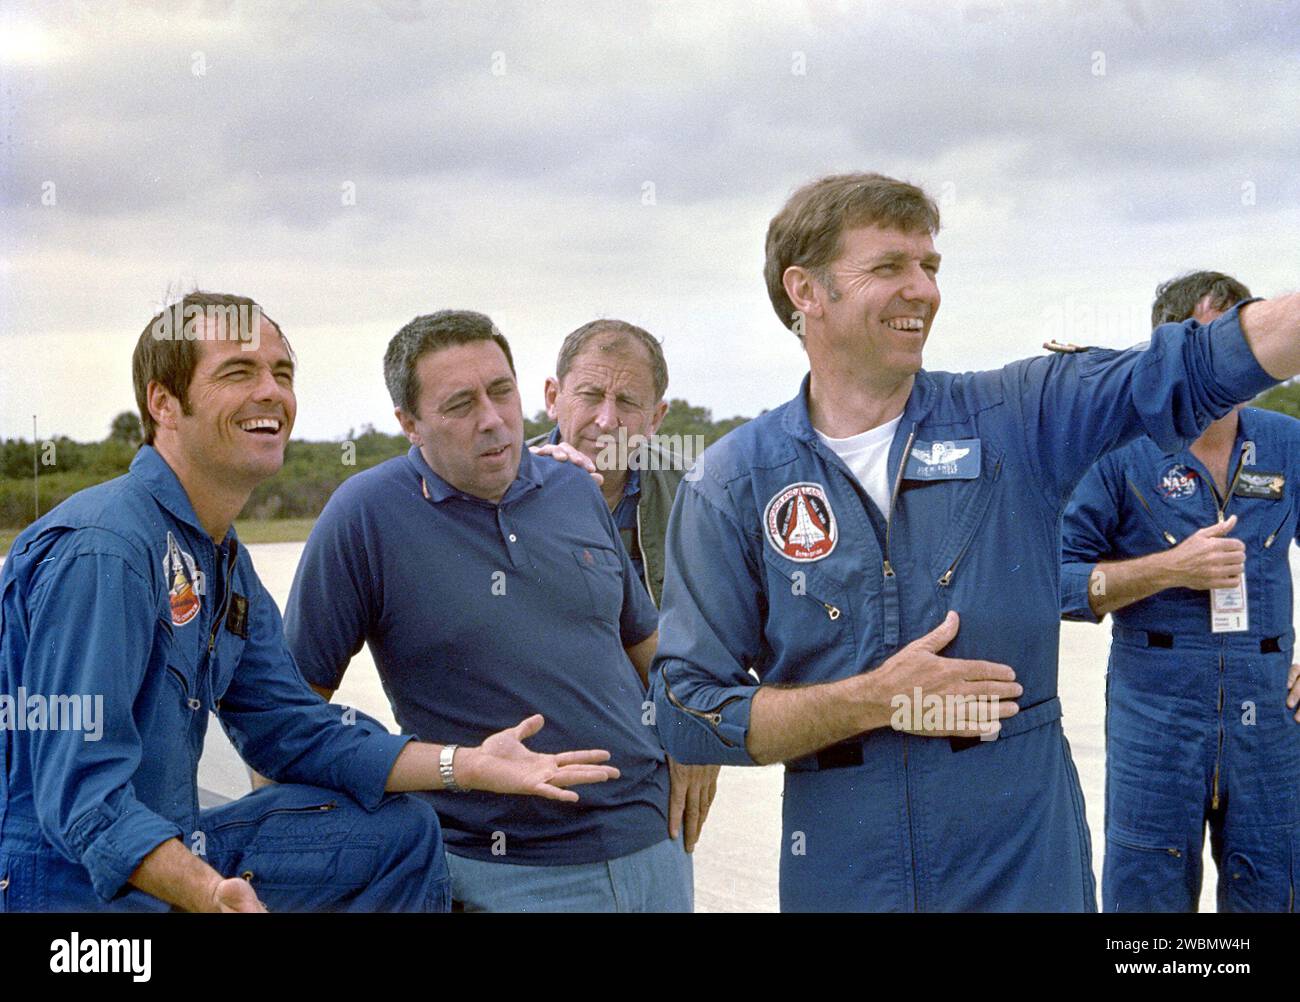 KENNEDY SPACE CENTER, FLA. - Astronaut Robert Crippen, left, relaxed despite the 'scrub' of the Space Shuttle launch on April 10, is joined at the Shuttle Landing Facility on April 11 by (from left) George Abbey, flight operations director; Joseph Algrantic, chief of Aircraft OPERATIONS Division, both with Johnson Space Center; and astronaut Joe Engle. Crippen and Young spent part of the day between the 'scrub' and the successful launch on April 12 in Shuttle landing practice, using a specially modified Grumman Airstream jet aircraft. Stock Photo